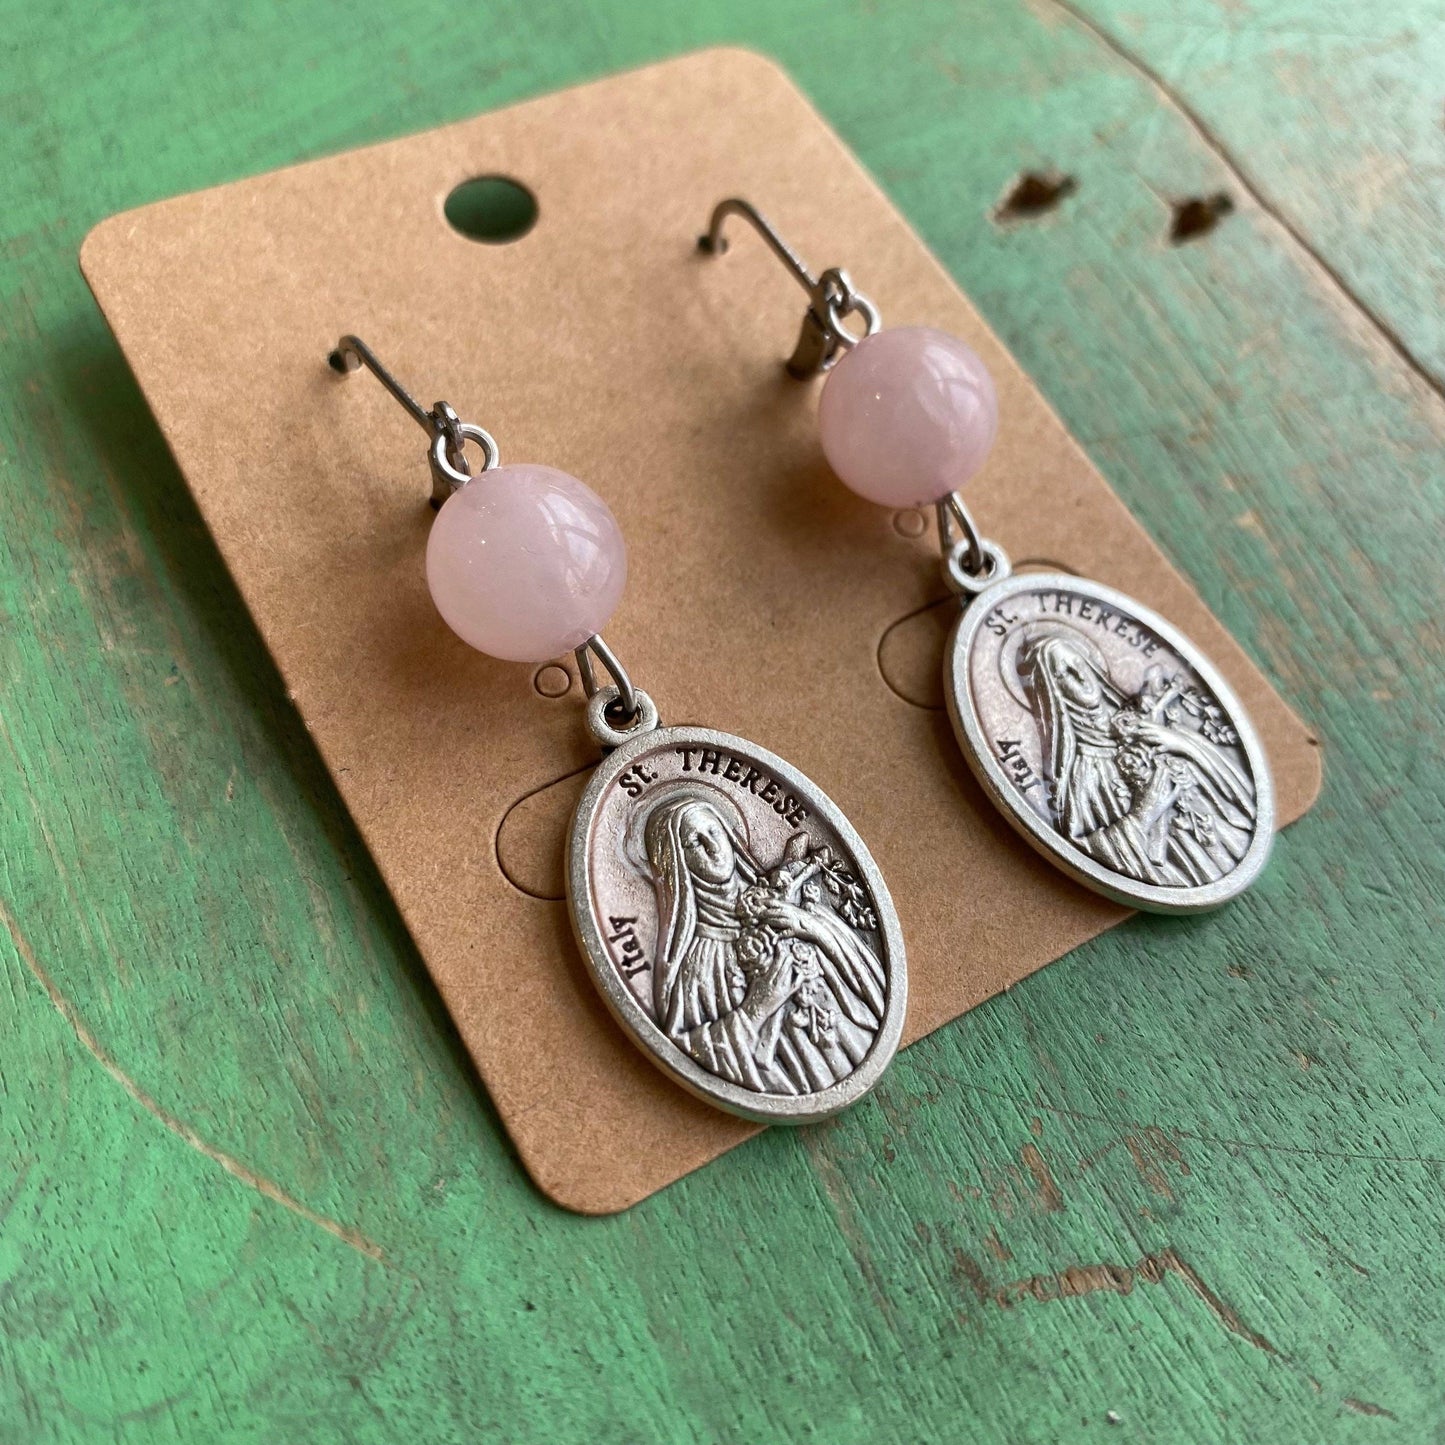 St Therese Pearly Pink Bracelet and Earrings: Bracelet